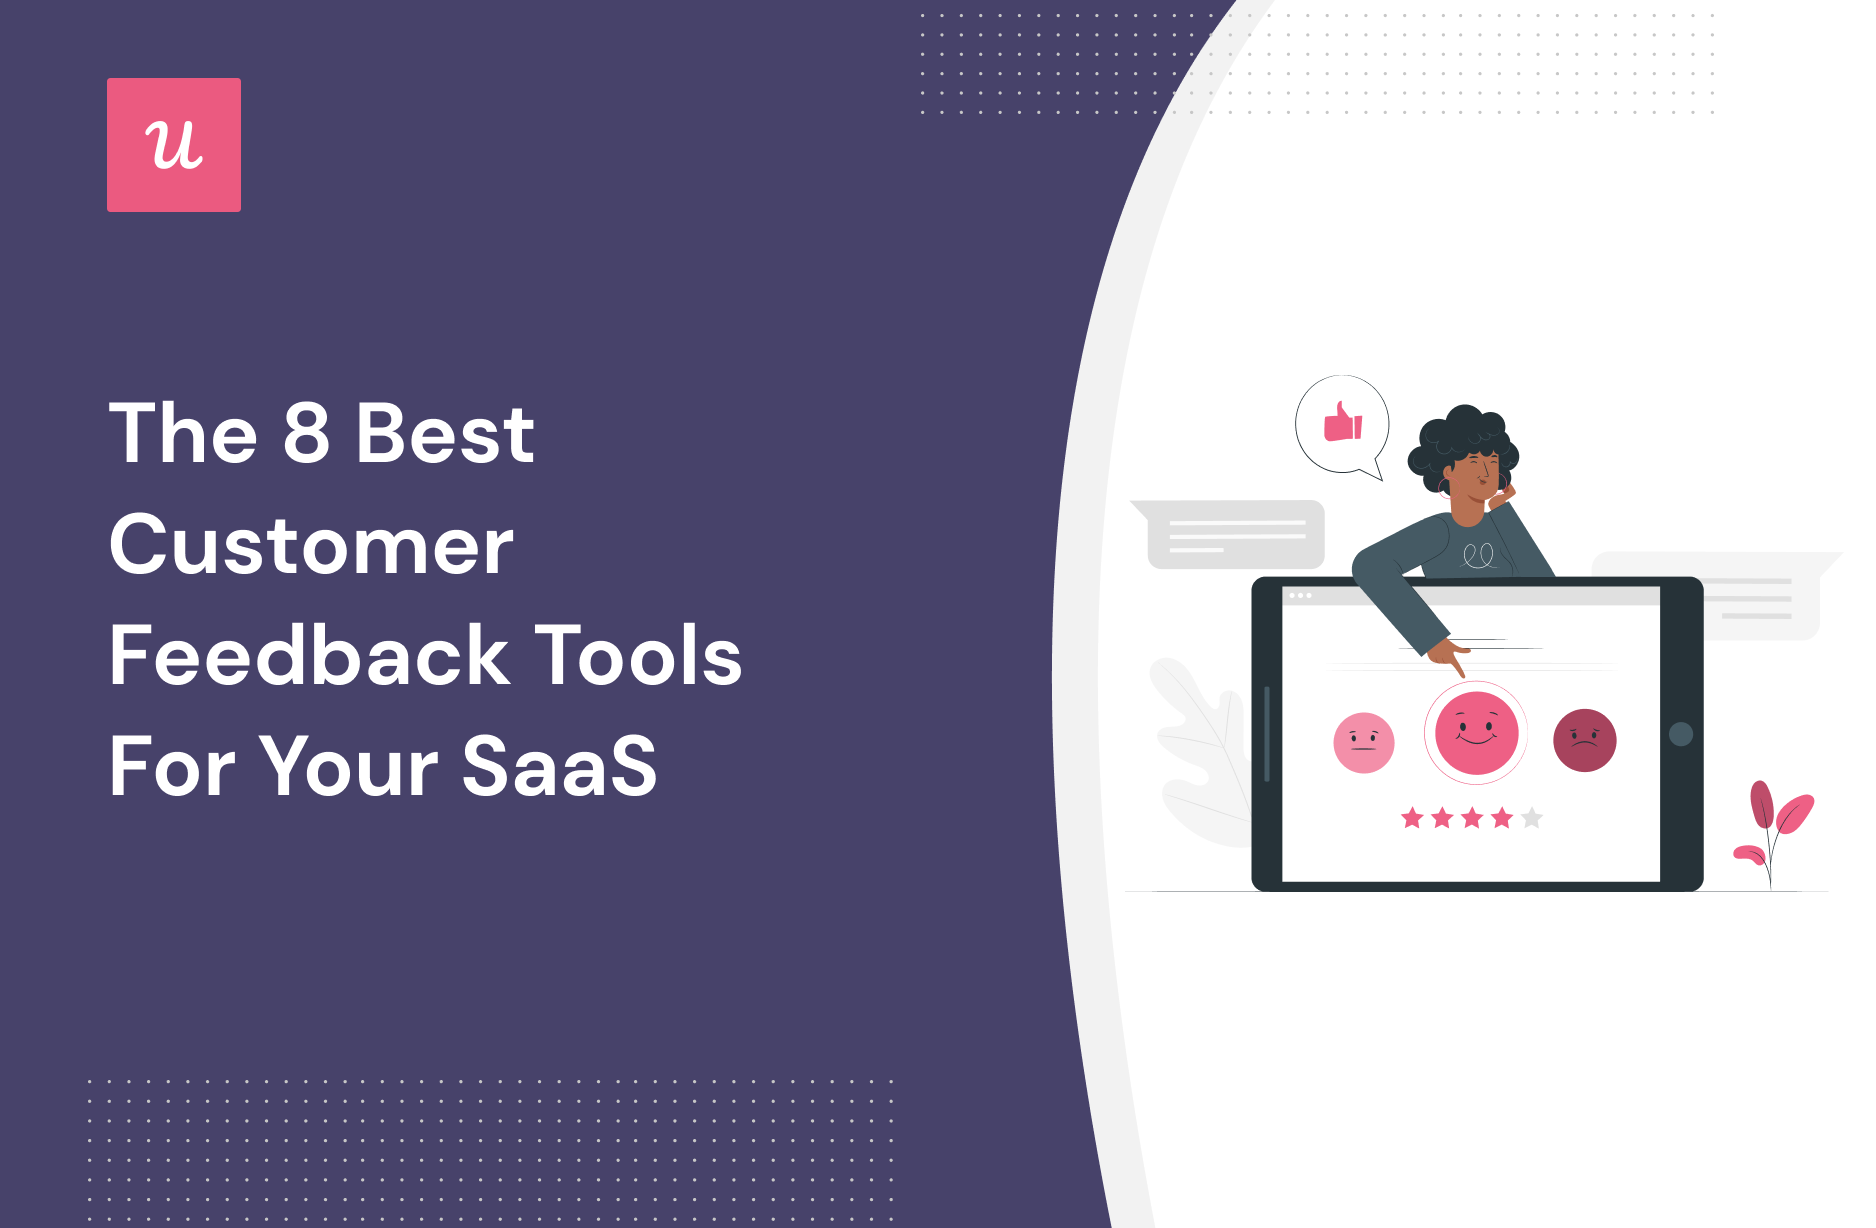 The 8 Best Customer Feedback Tools for Your SaaS